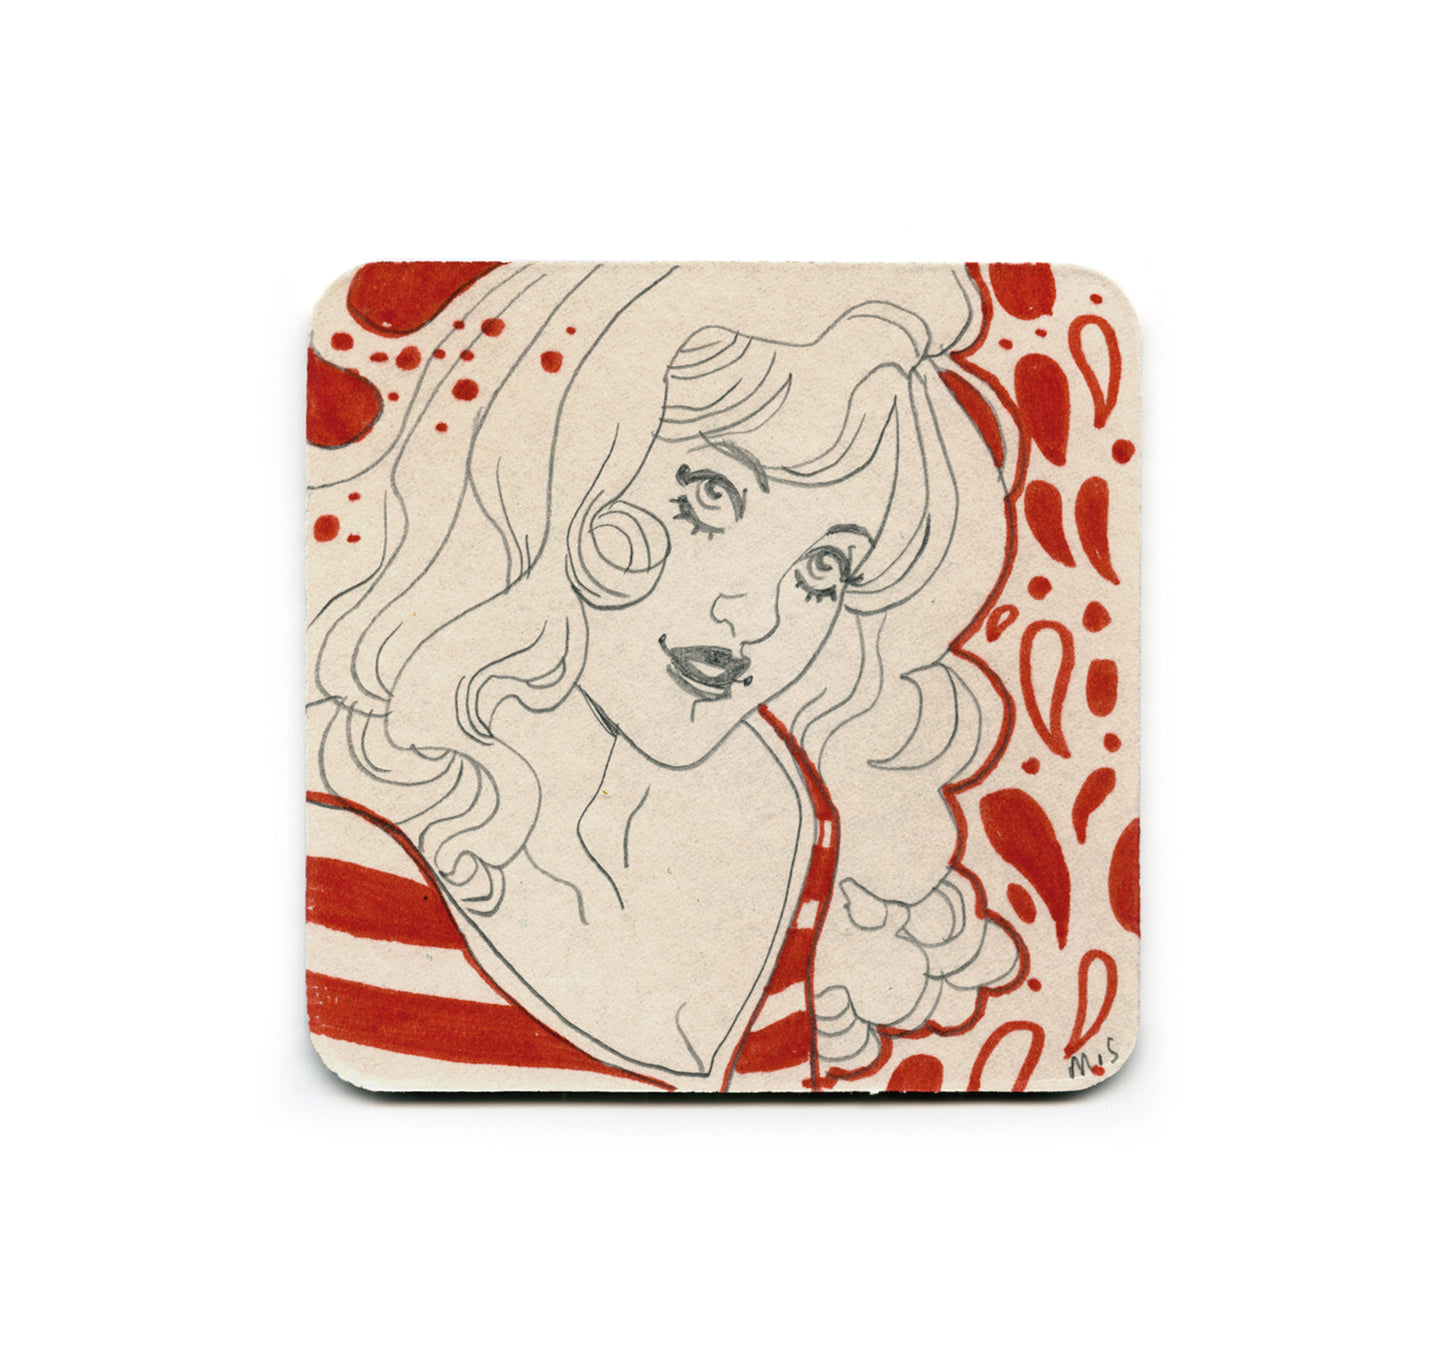 S2 Marguerite Sauvage - Red Coaster